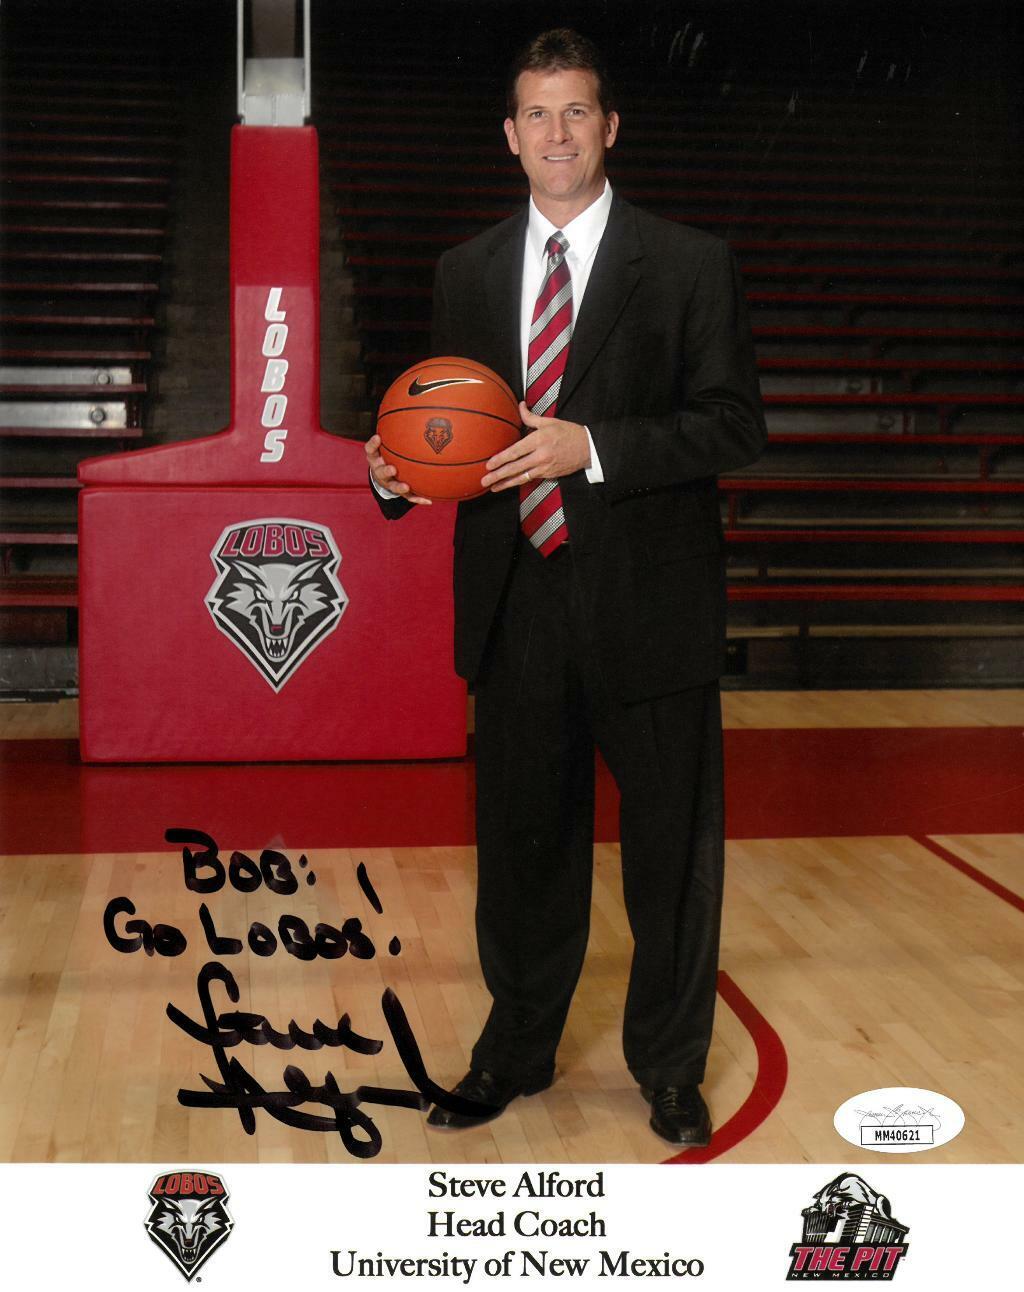 Steve Alford Signed Authentic Autographed 8x10 Photo Poster painting JSA #MM40621